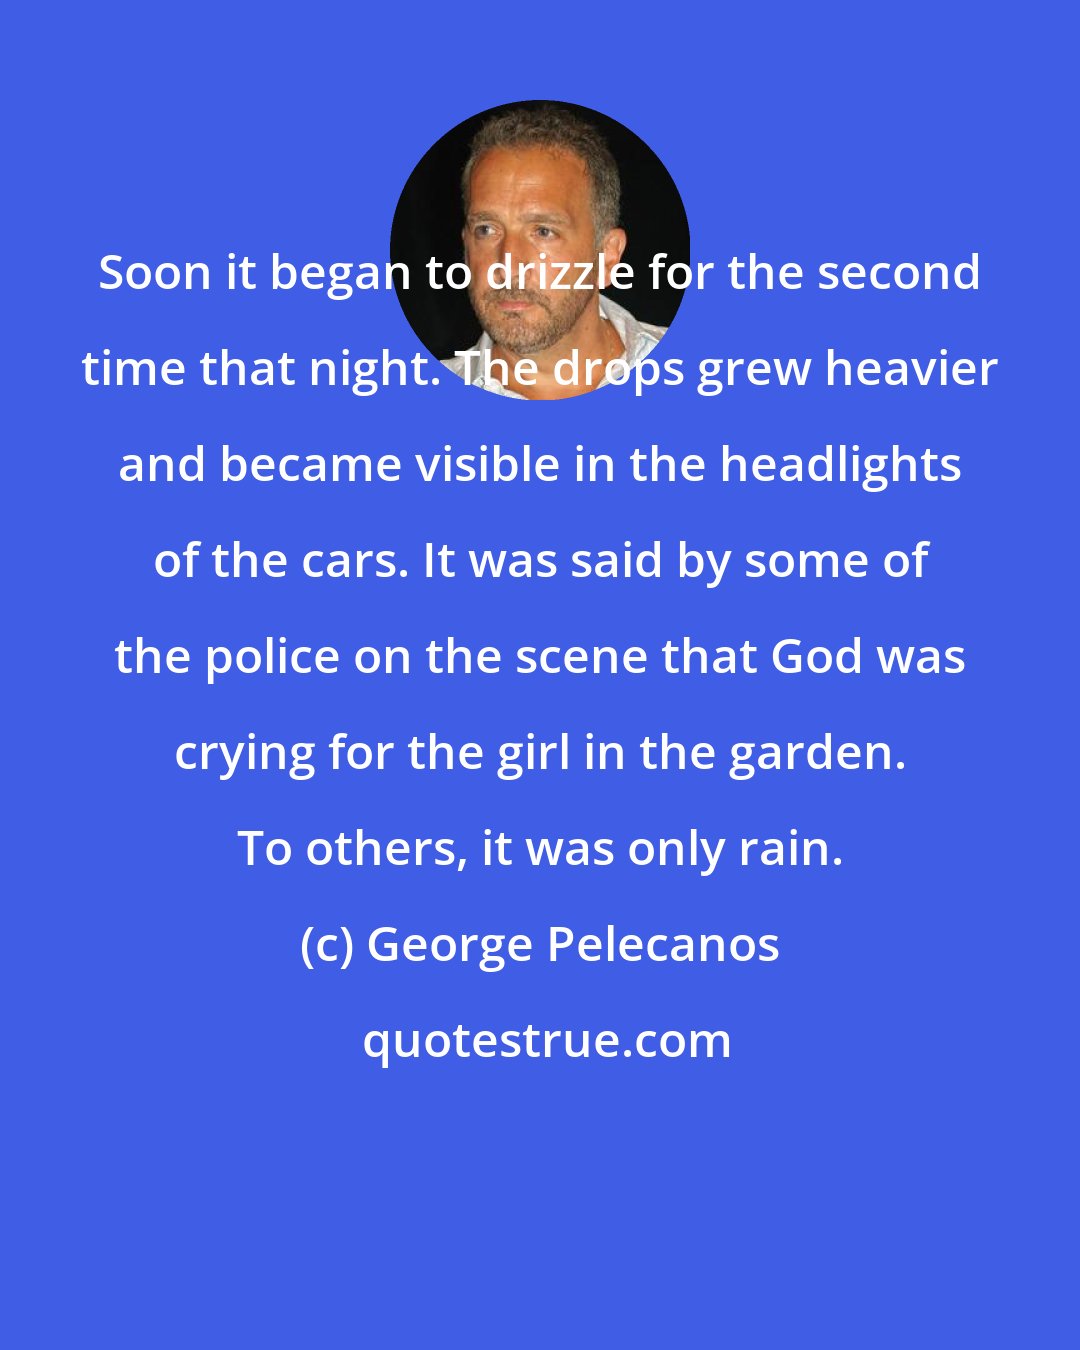 George Pelecanos: Soon it began to drizzle for the second time that night. The drops grew heavier and became visible in the headlights of the cars. It was said by some of the police on the scene that God was crying for the girl in the garden. To others, it was only rain.